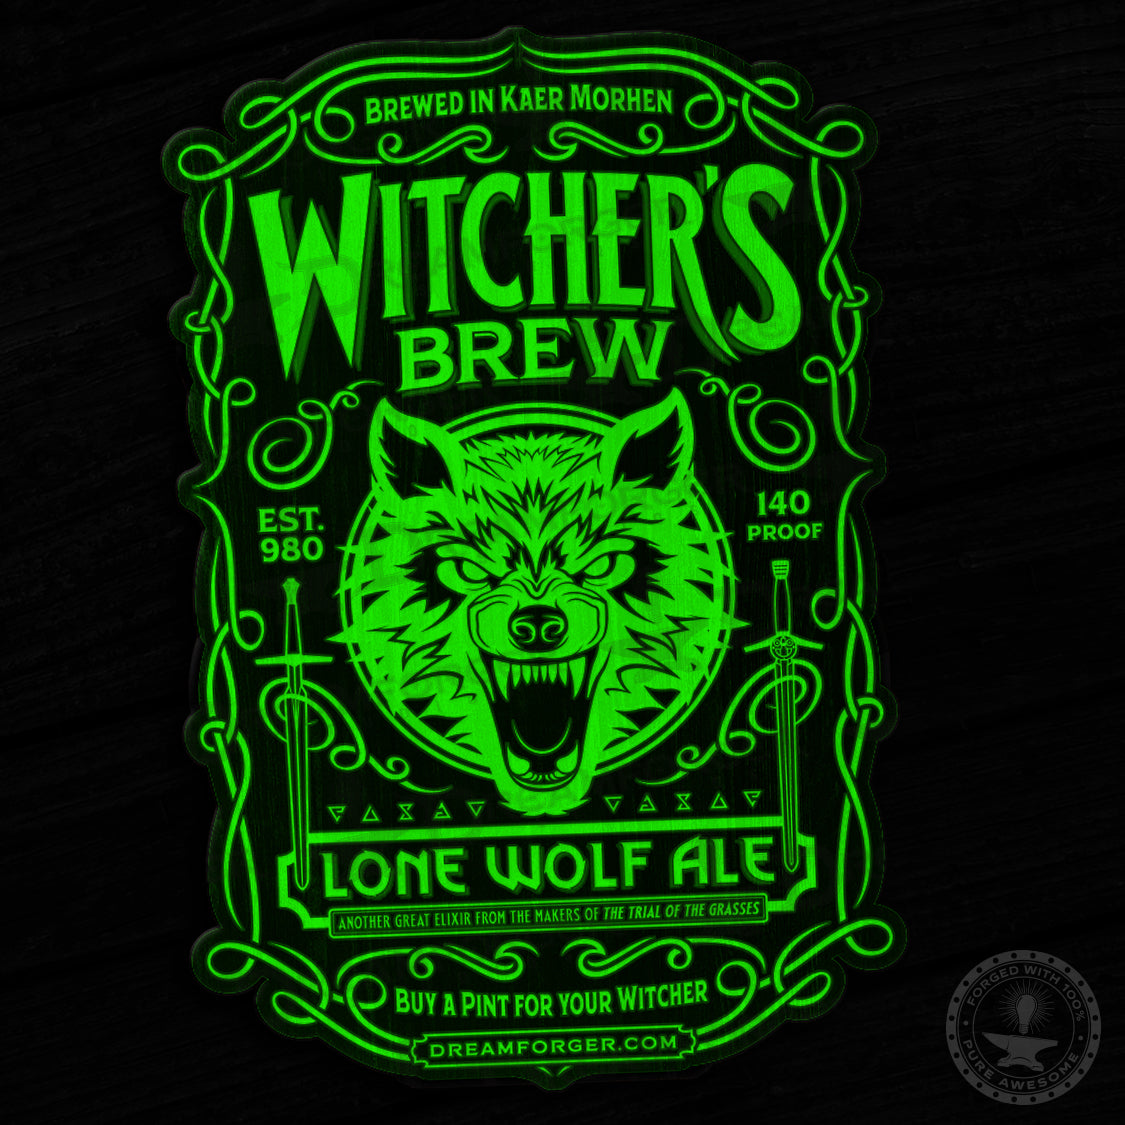 The Witchering "Witcher's Brew" GITD Magical Decal